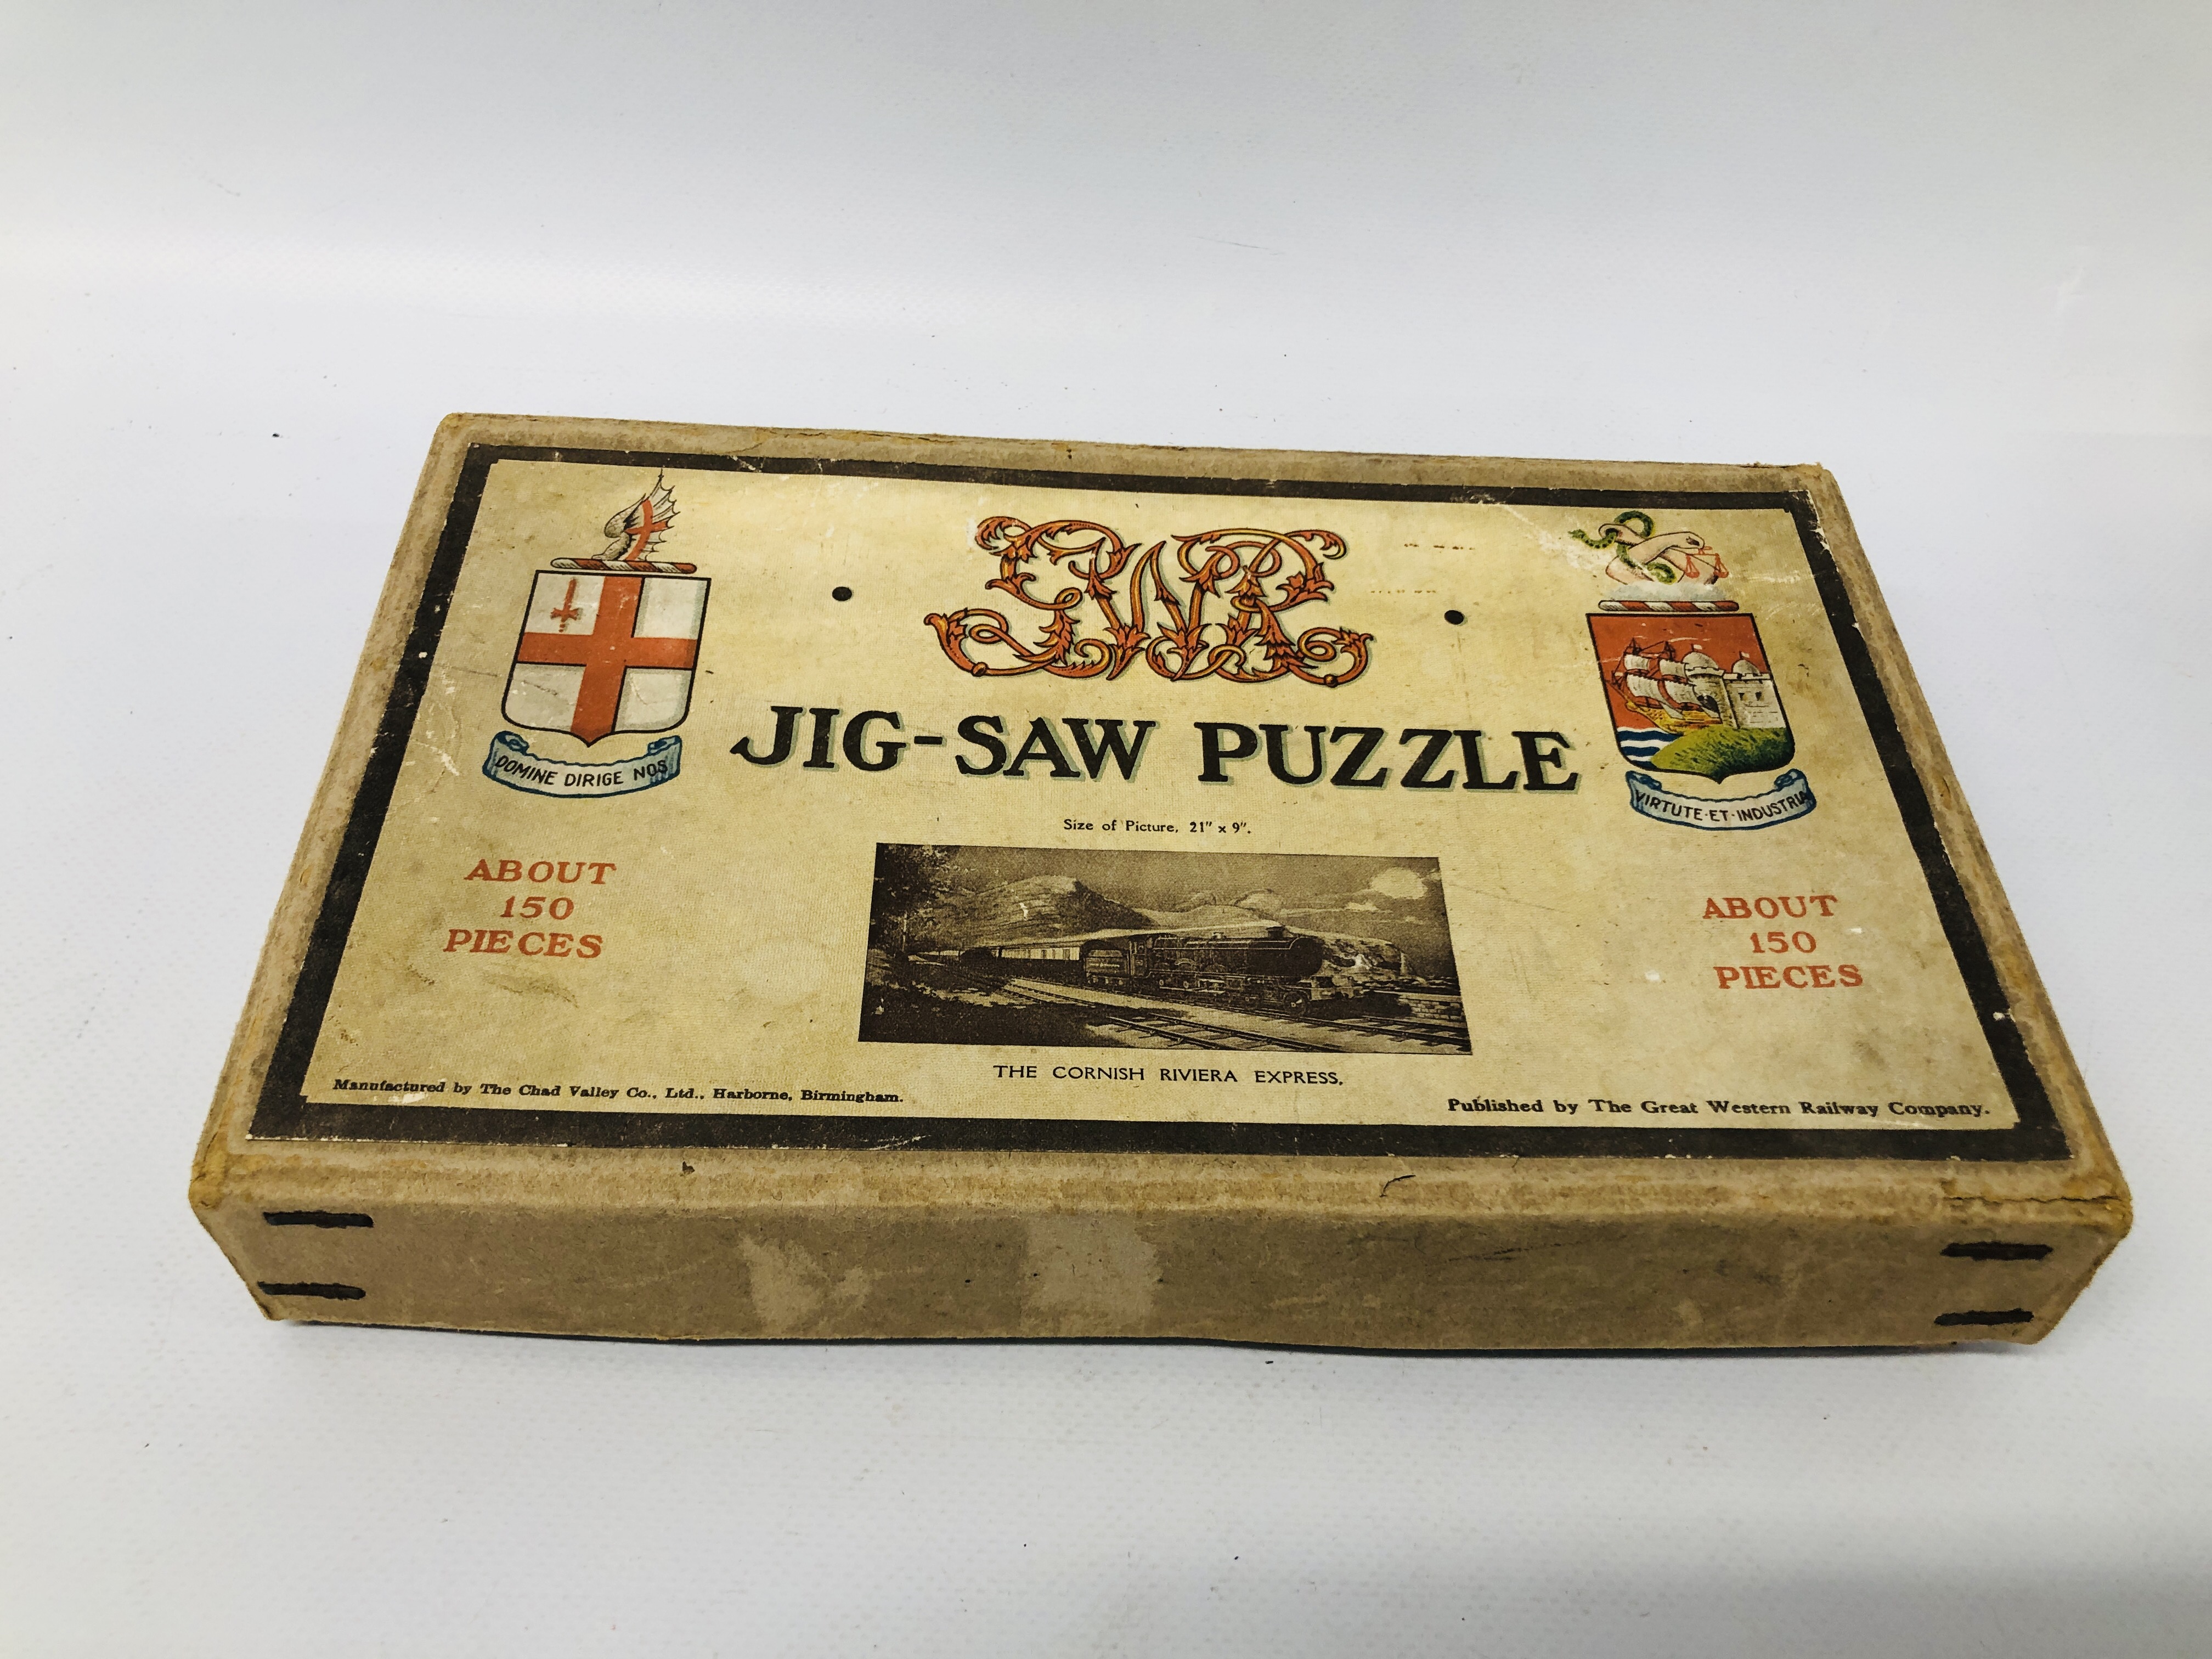 3 X VINTAGE BOXED RAILWAY RELATED PUZZLES + ONE OTHER ALONG WITH A TRIANG CHORAL SPINNING TOP - Image 2 of 9